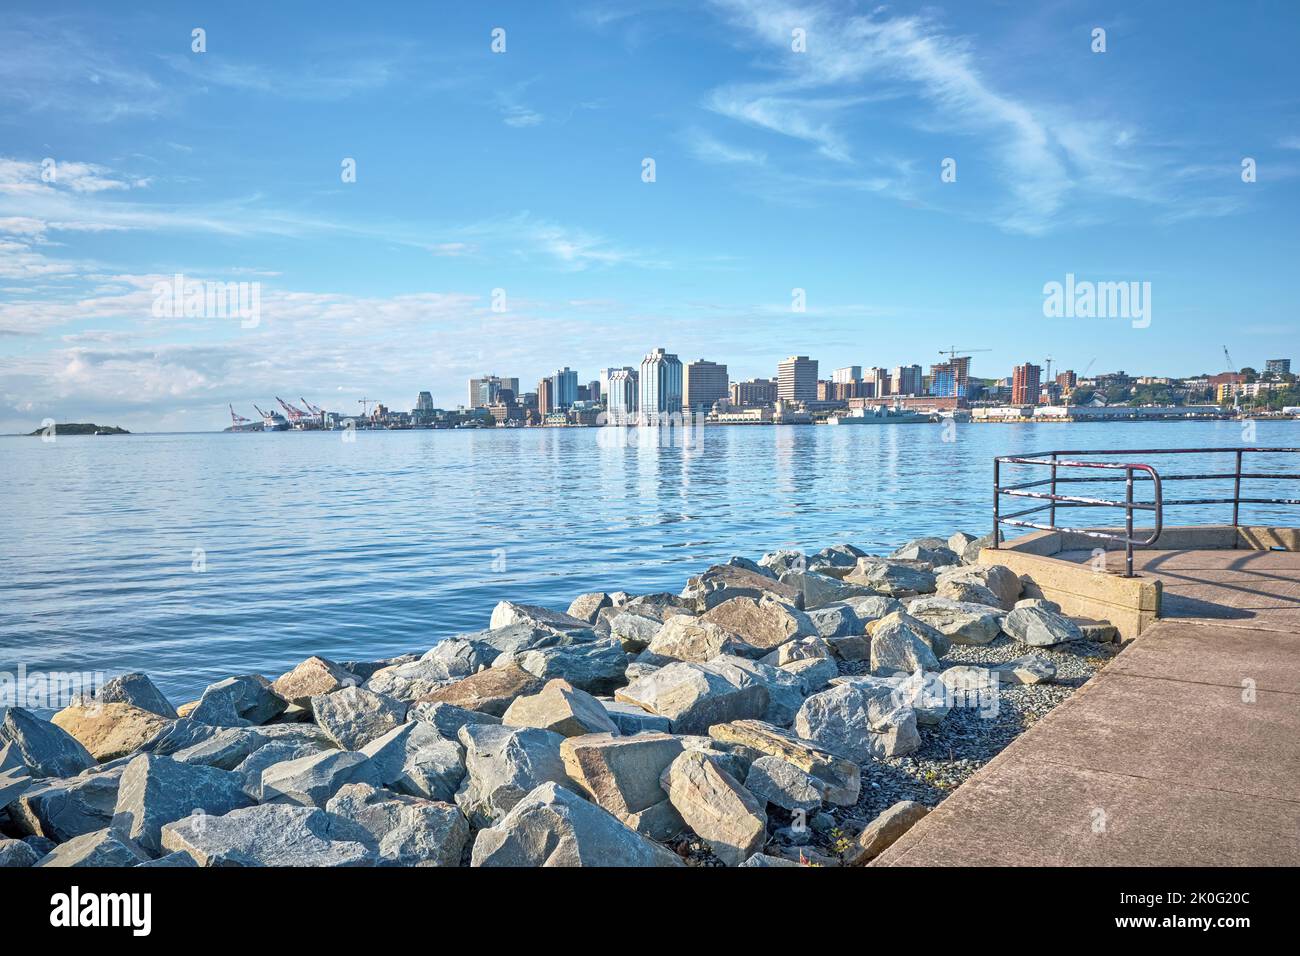 The City of Halifax Nova Scotia photographed across the harbour from the City of Dartmouth. Stock Photo